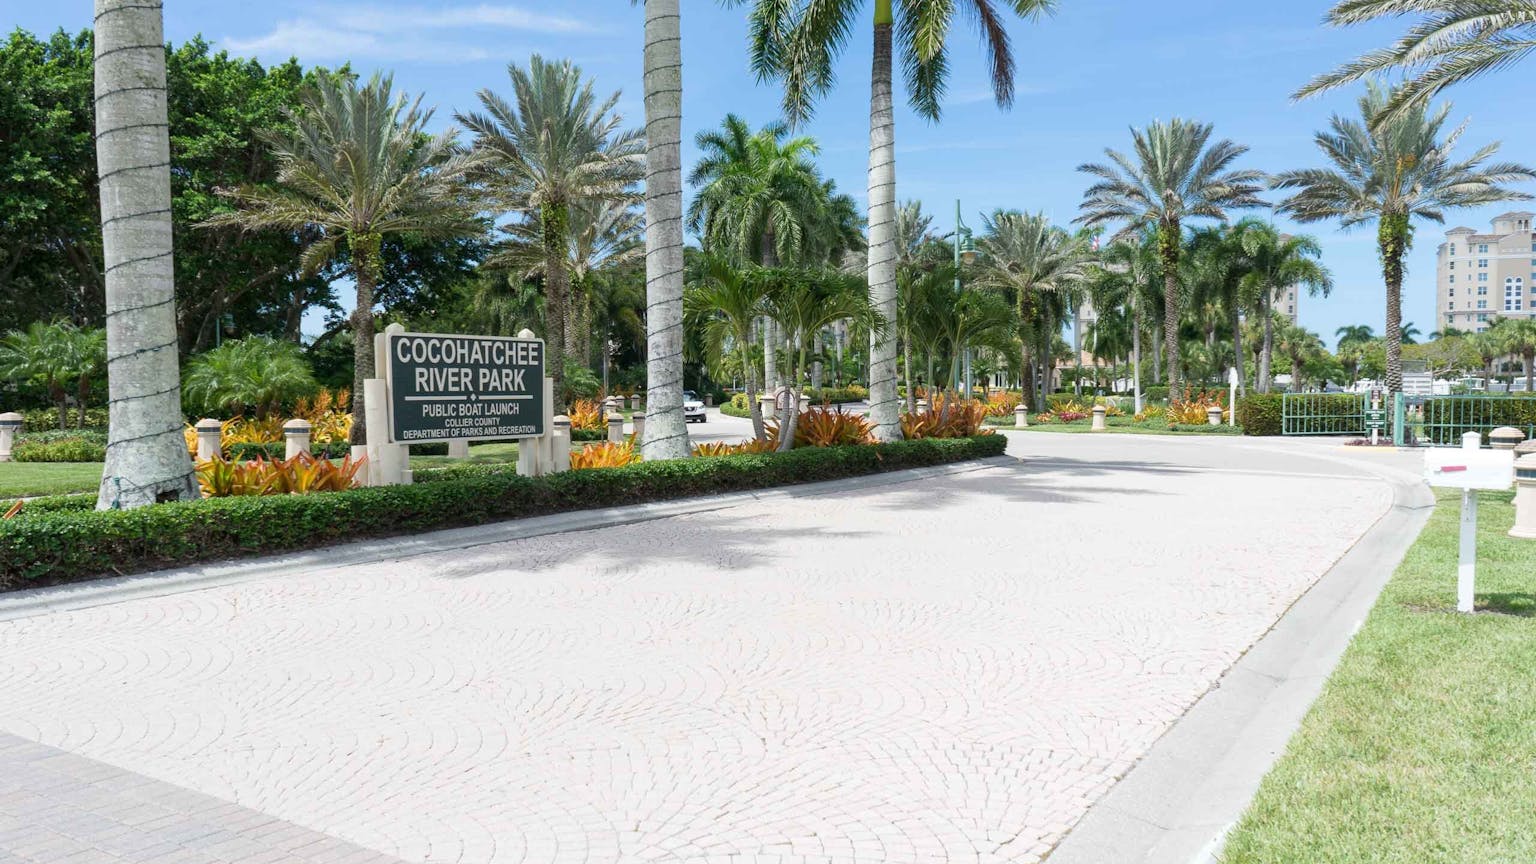 Entrance to Cocohatchee River Park in North Naples